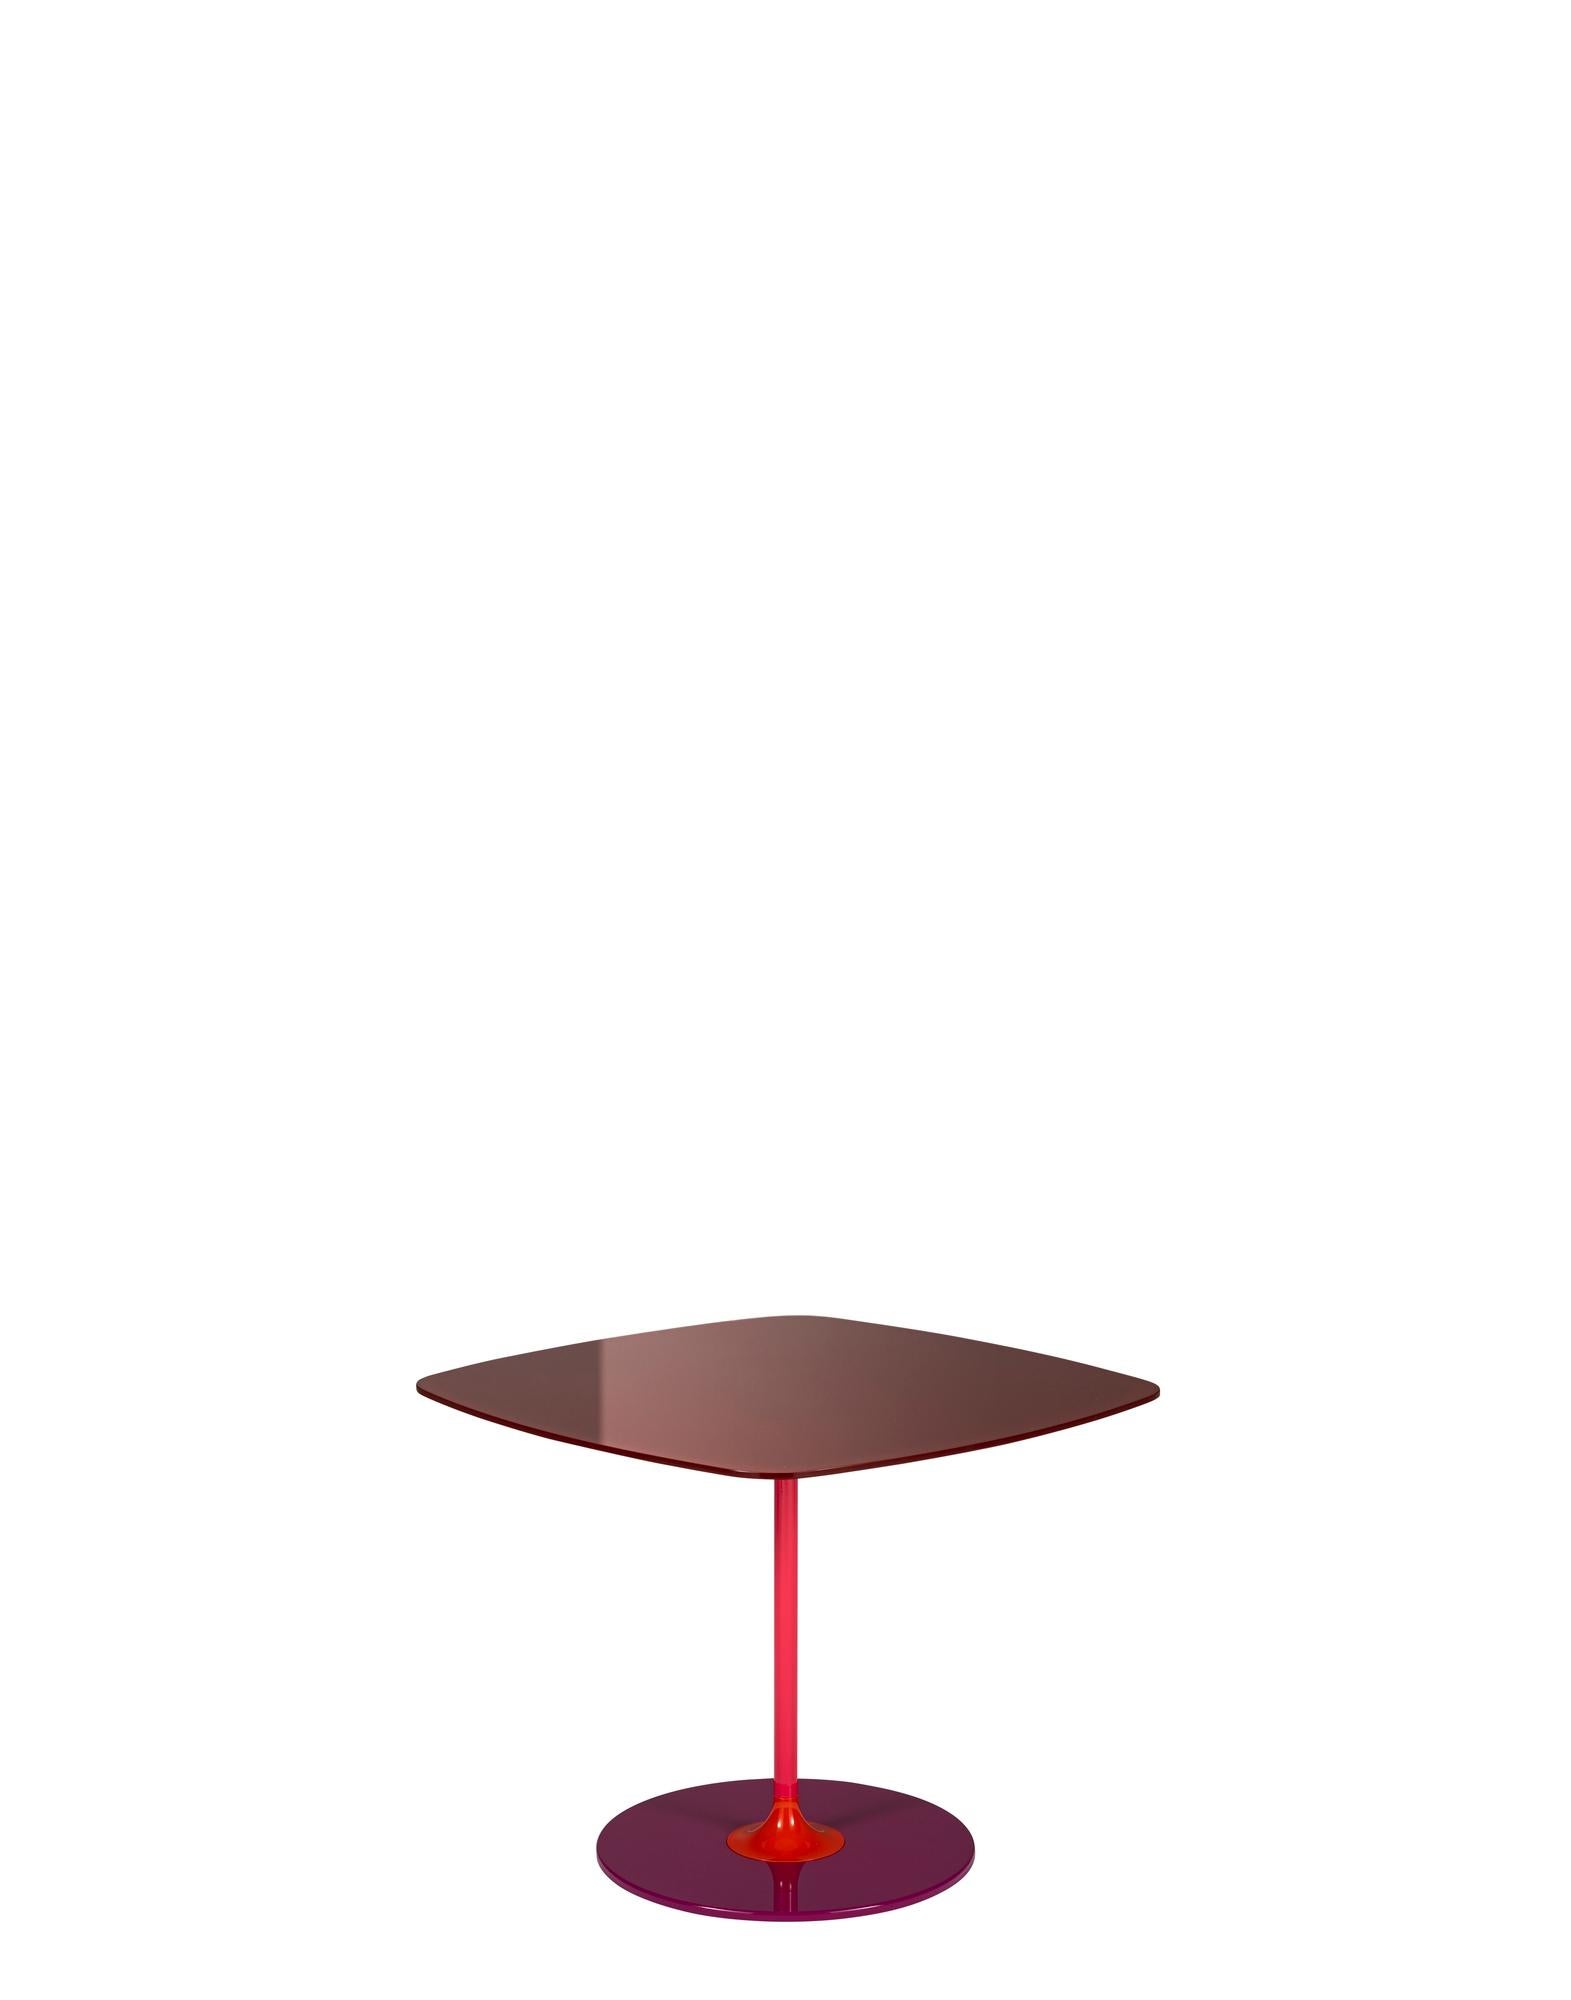 Thierry is a family of highly characteristic occasional tables that make an inspired use of colour. Each table can have 3 or 4 different colours and can be assembled in various ways. The beauty of these little tables lies in their jewel-like design.